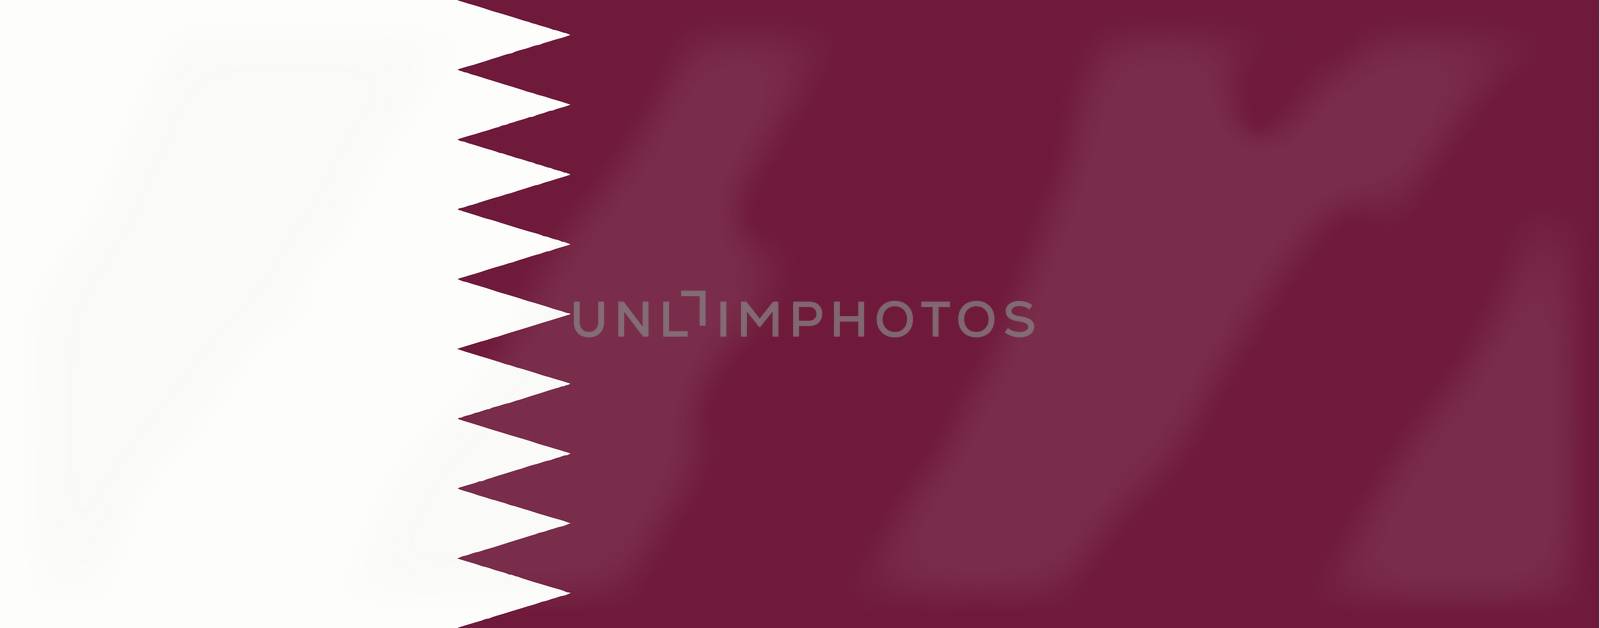 Flag of the Arab League country of Qatar